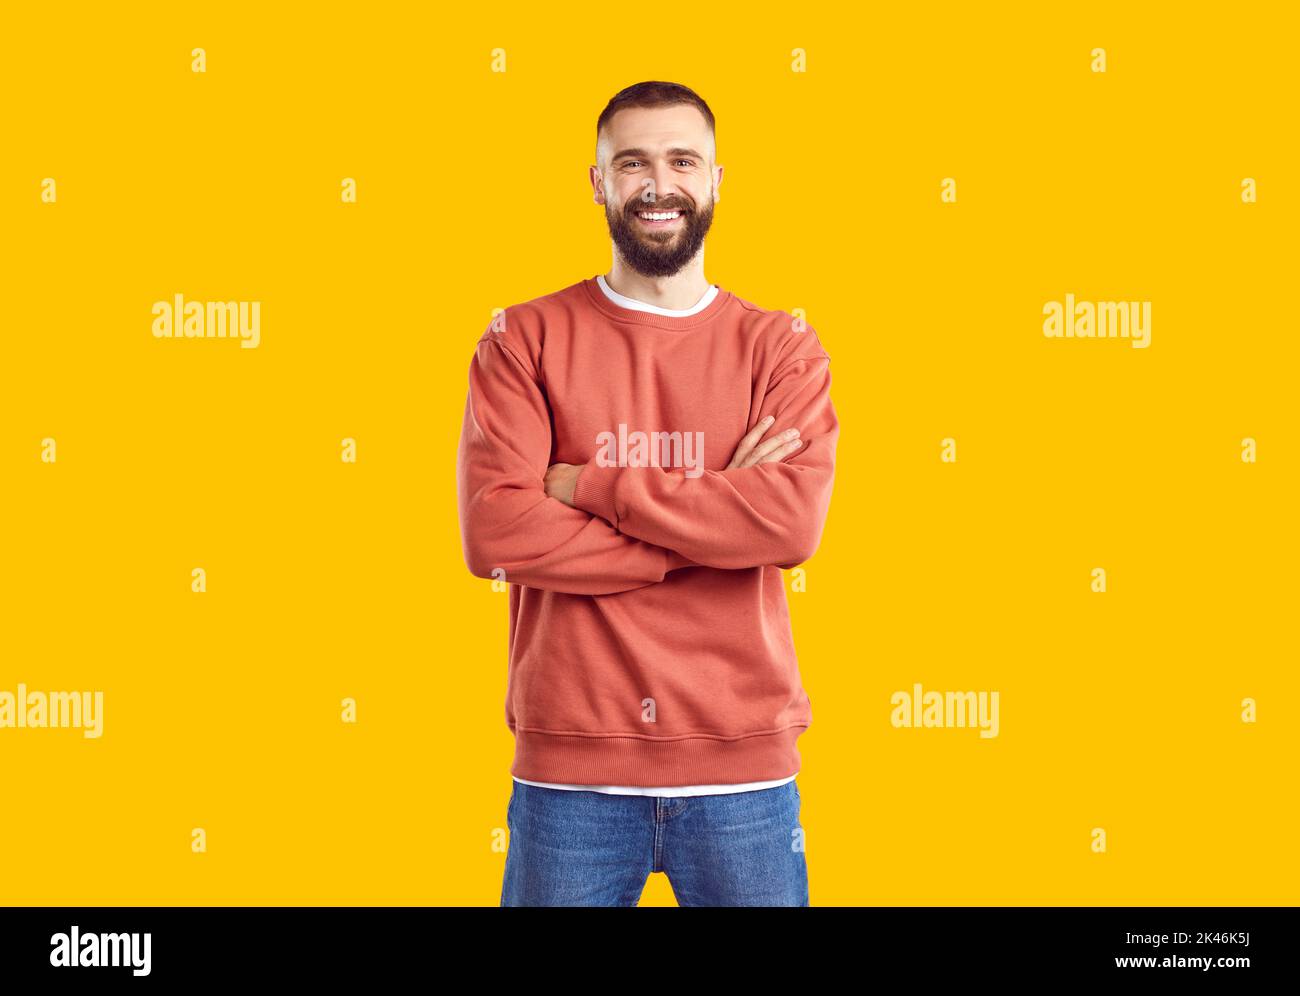 Young smiling man in red sweatshirt and jeans is posing on yellow background looking at camera. Stock Photo